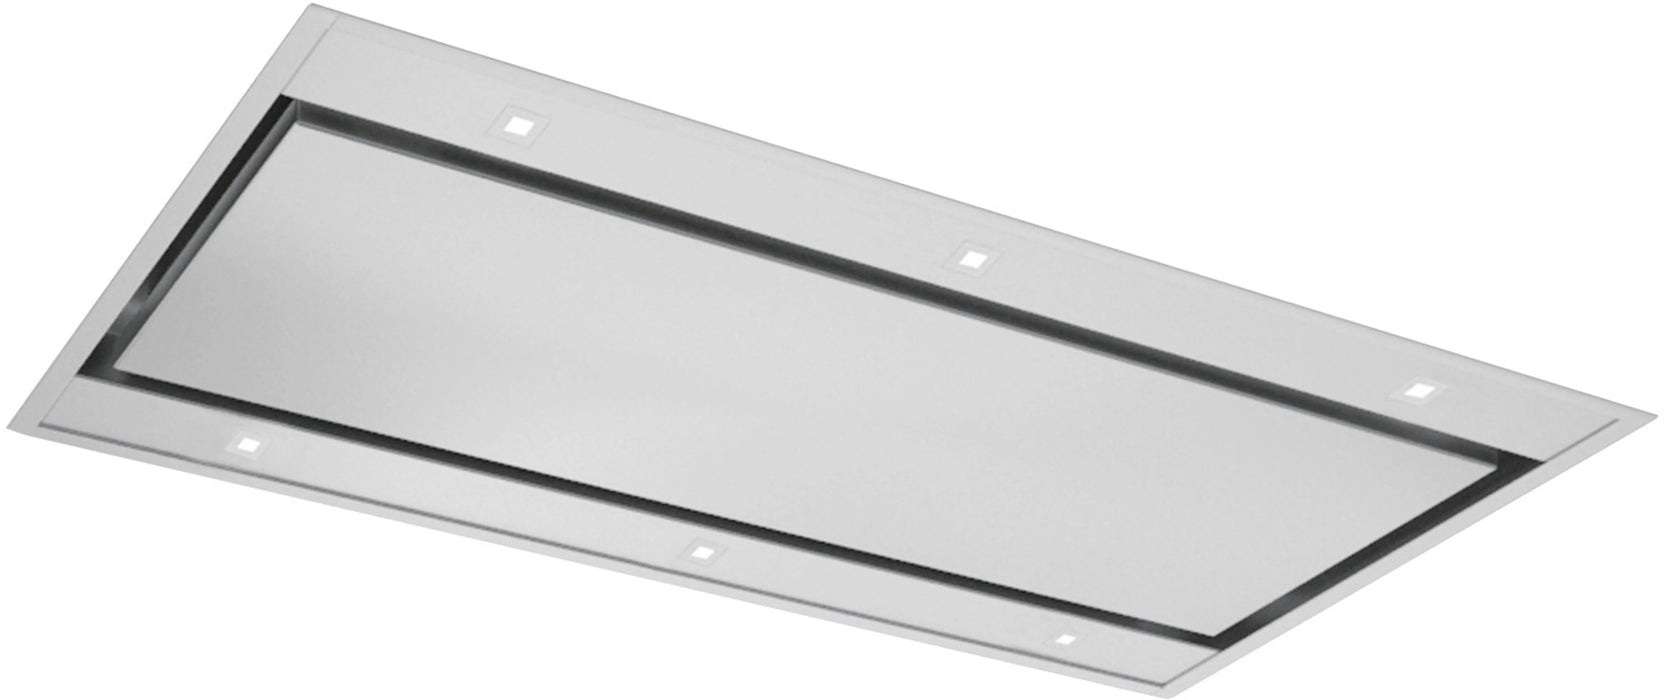 Forté Vertice Recessed Ceiling Mount Hood with 600 CFM in Stainless Steel VERTICE36 - Farmhouse Kitchen and Bath